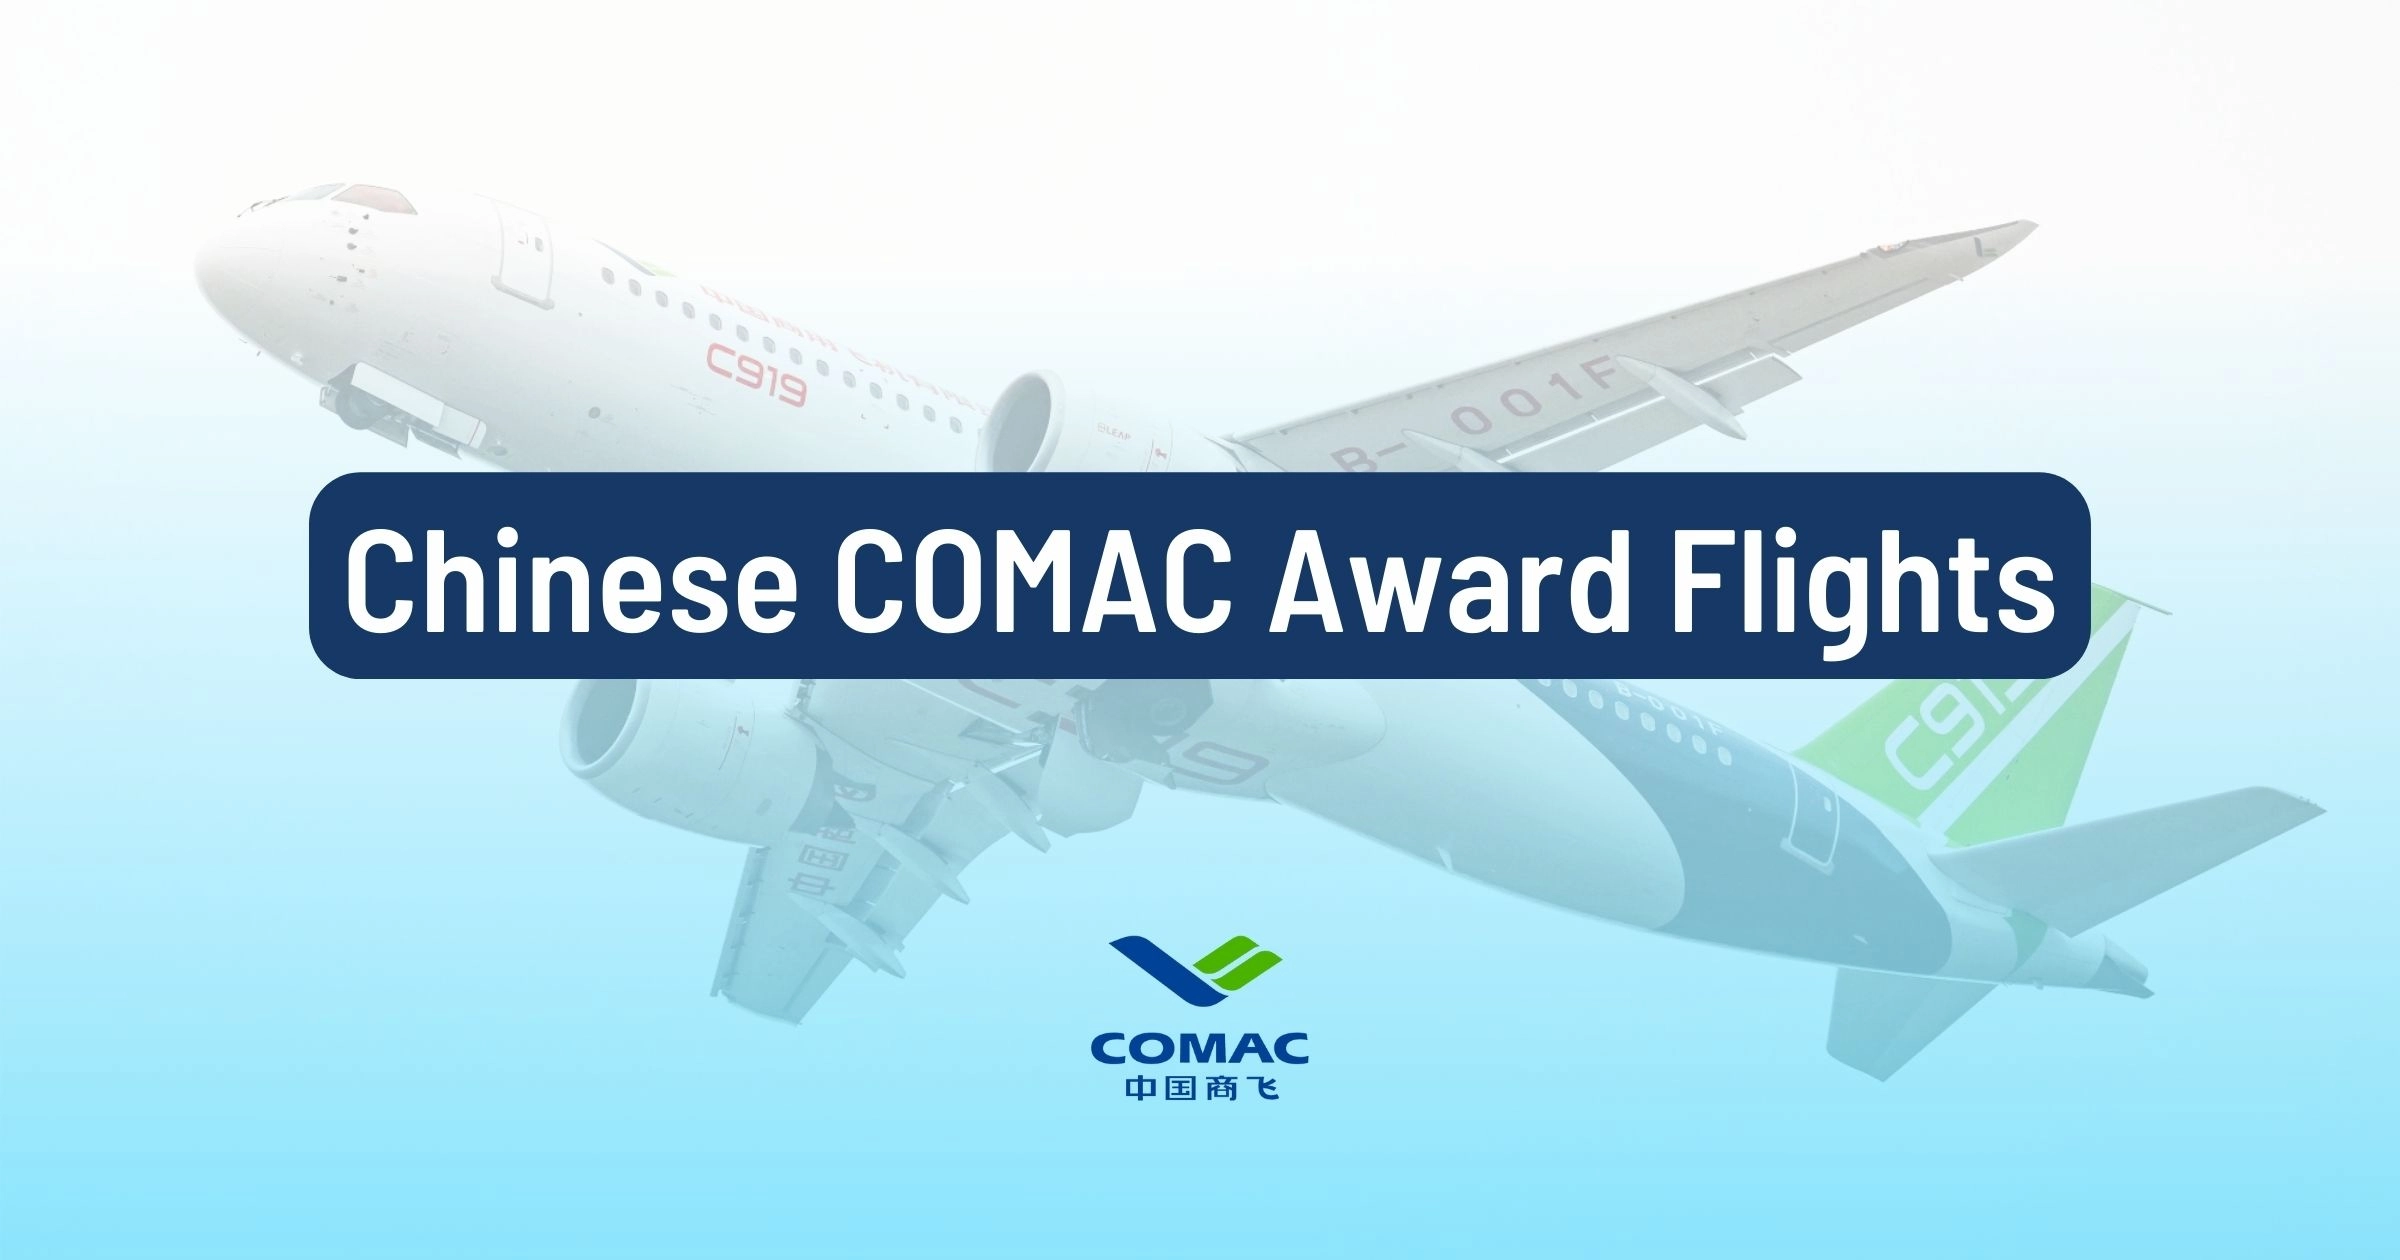 Cover image for How To Book Award Flights On The Chinese COMAC Planes